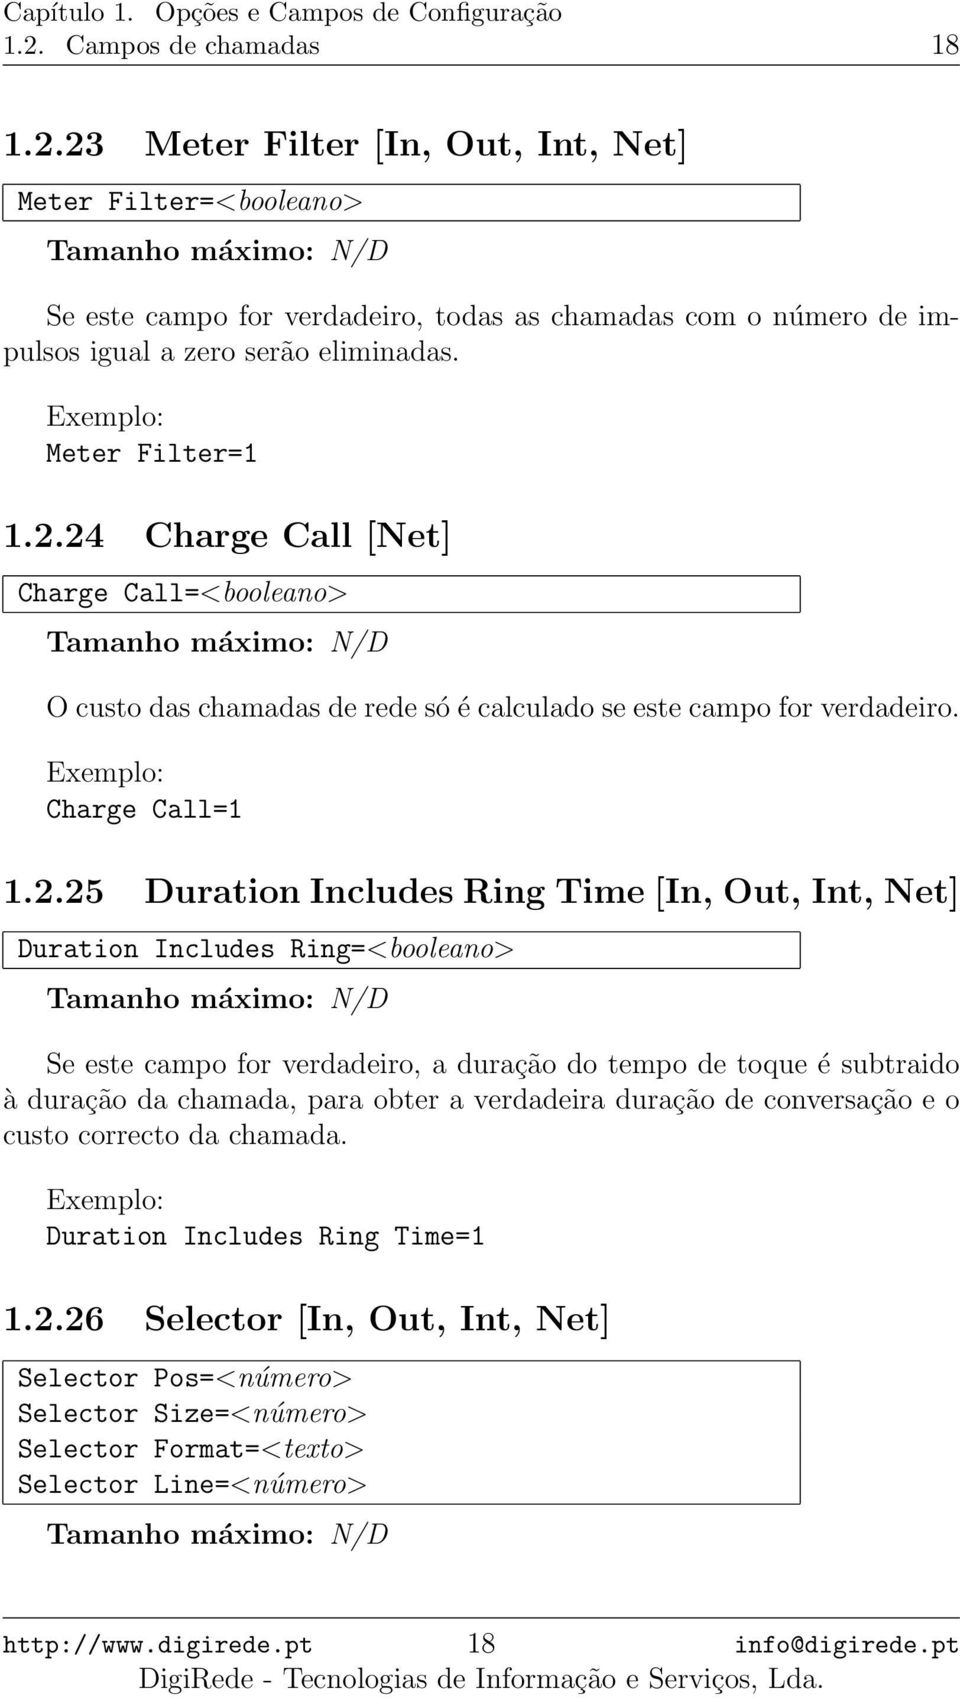 24 Charge Call [Net] Charge Call=<booleano> O custo das chamadas de rede só é calculado se este campo for verdadeiro. Charge Call=1 1.2.25 Duration Includes Ring Time [In, Out, Int, Net] Duration